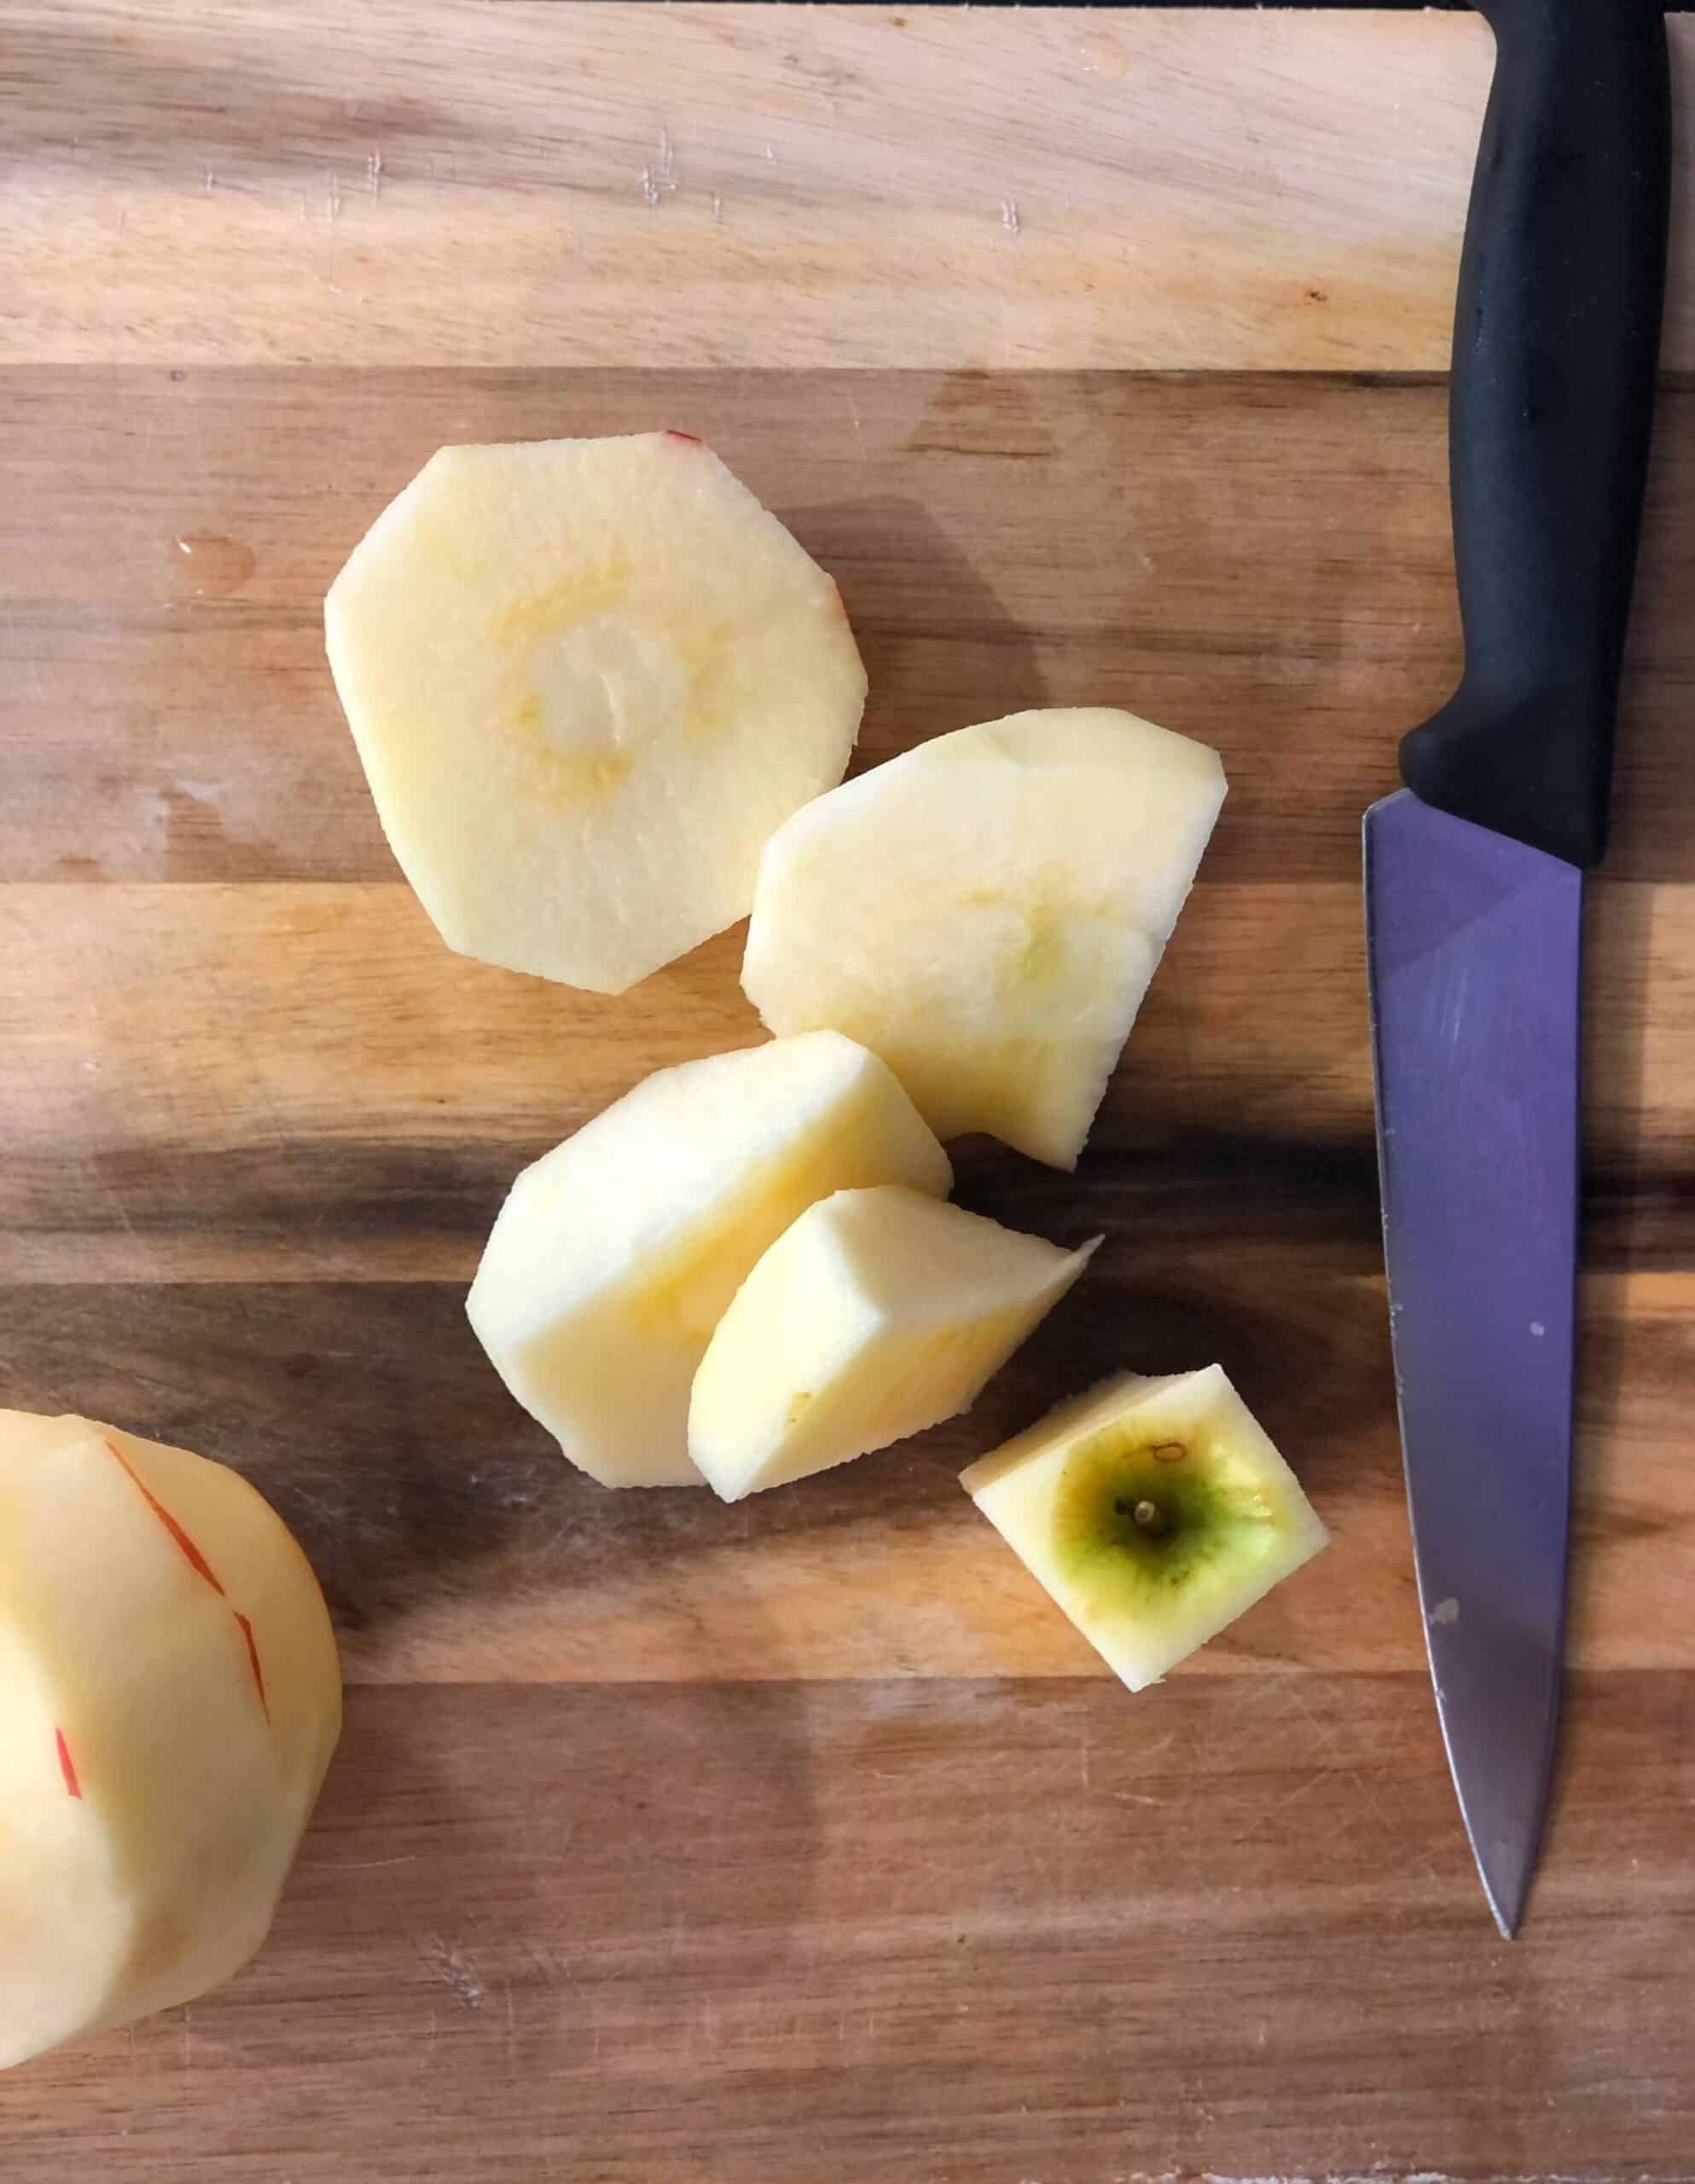 Sliced apples on a cutting board.